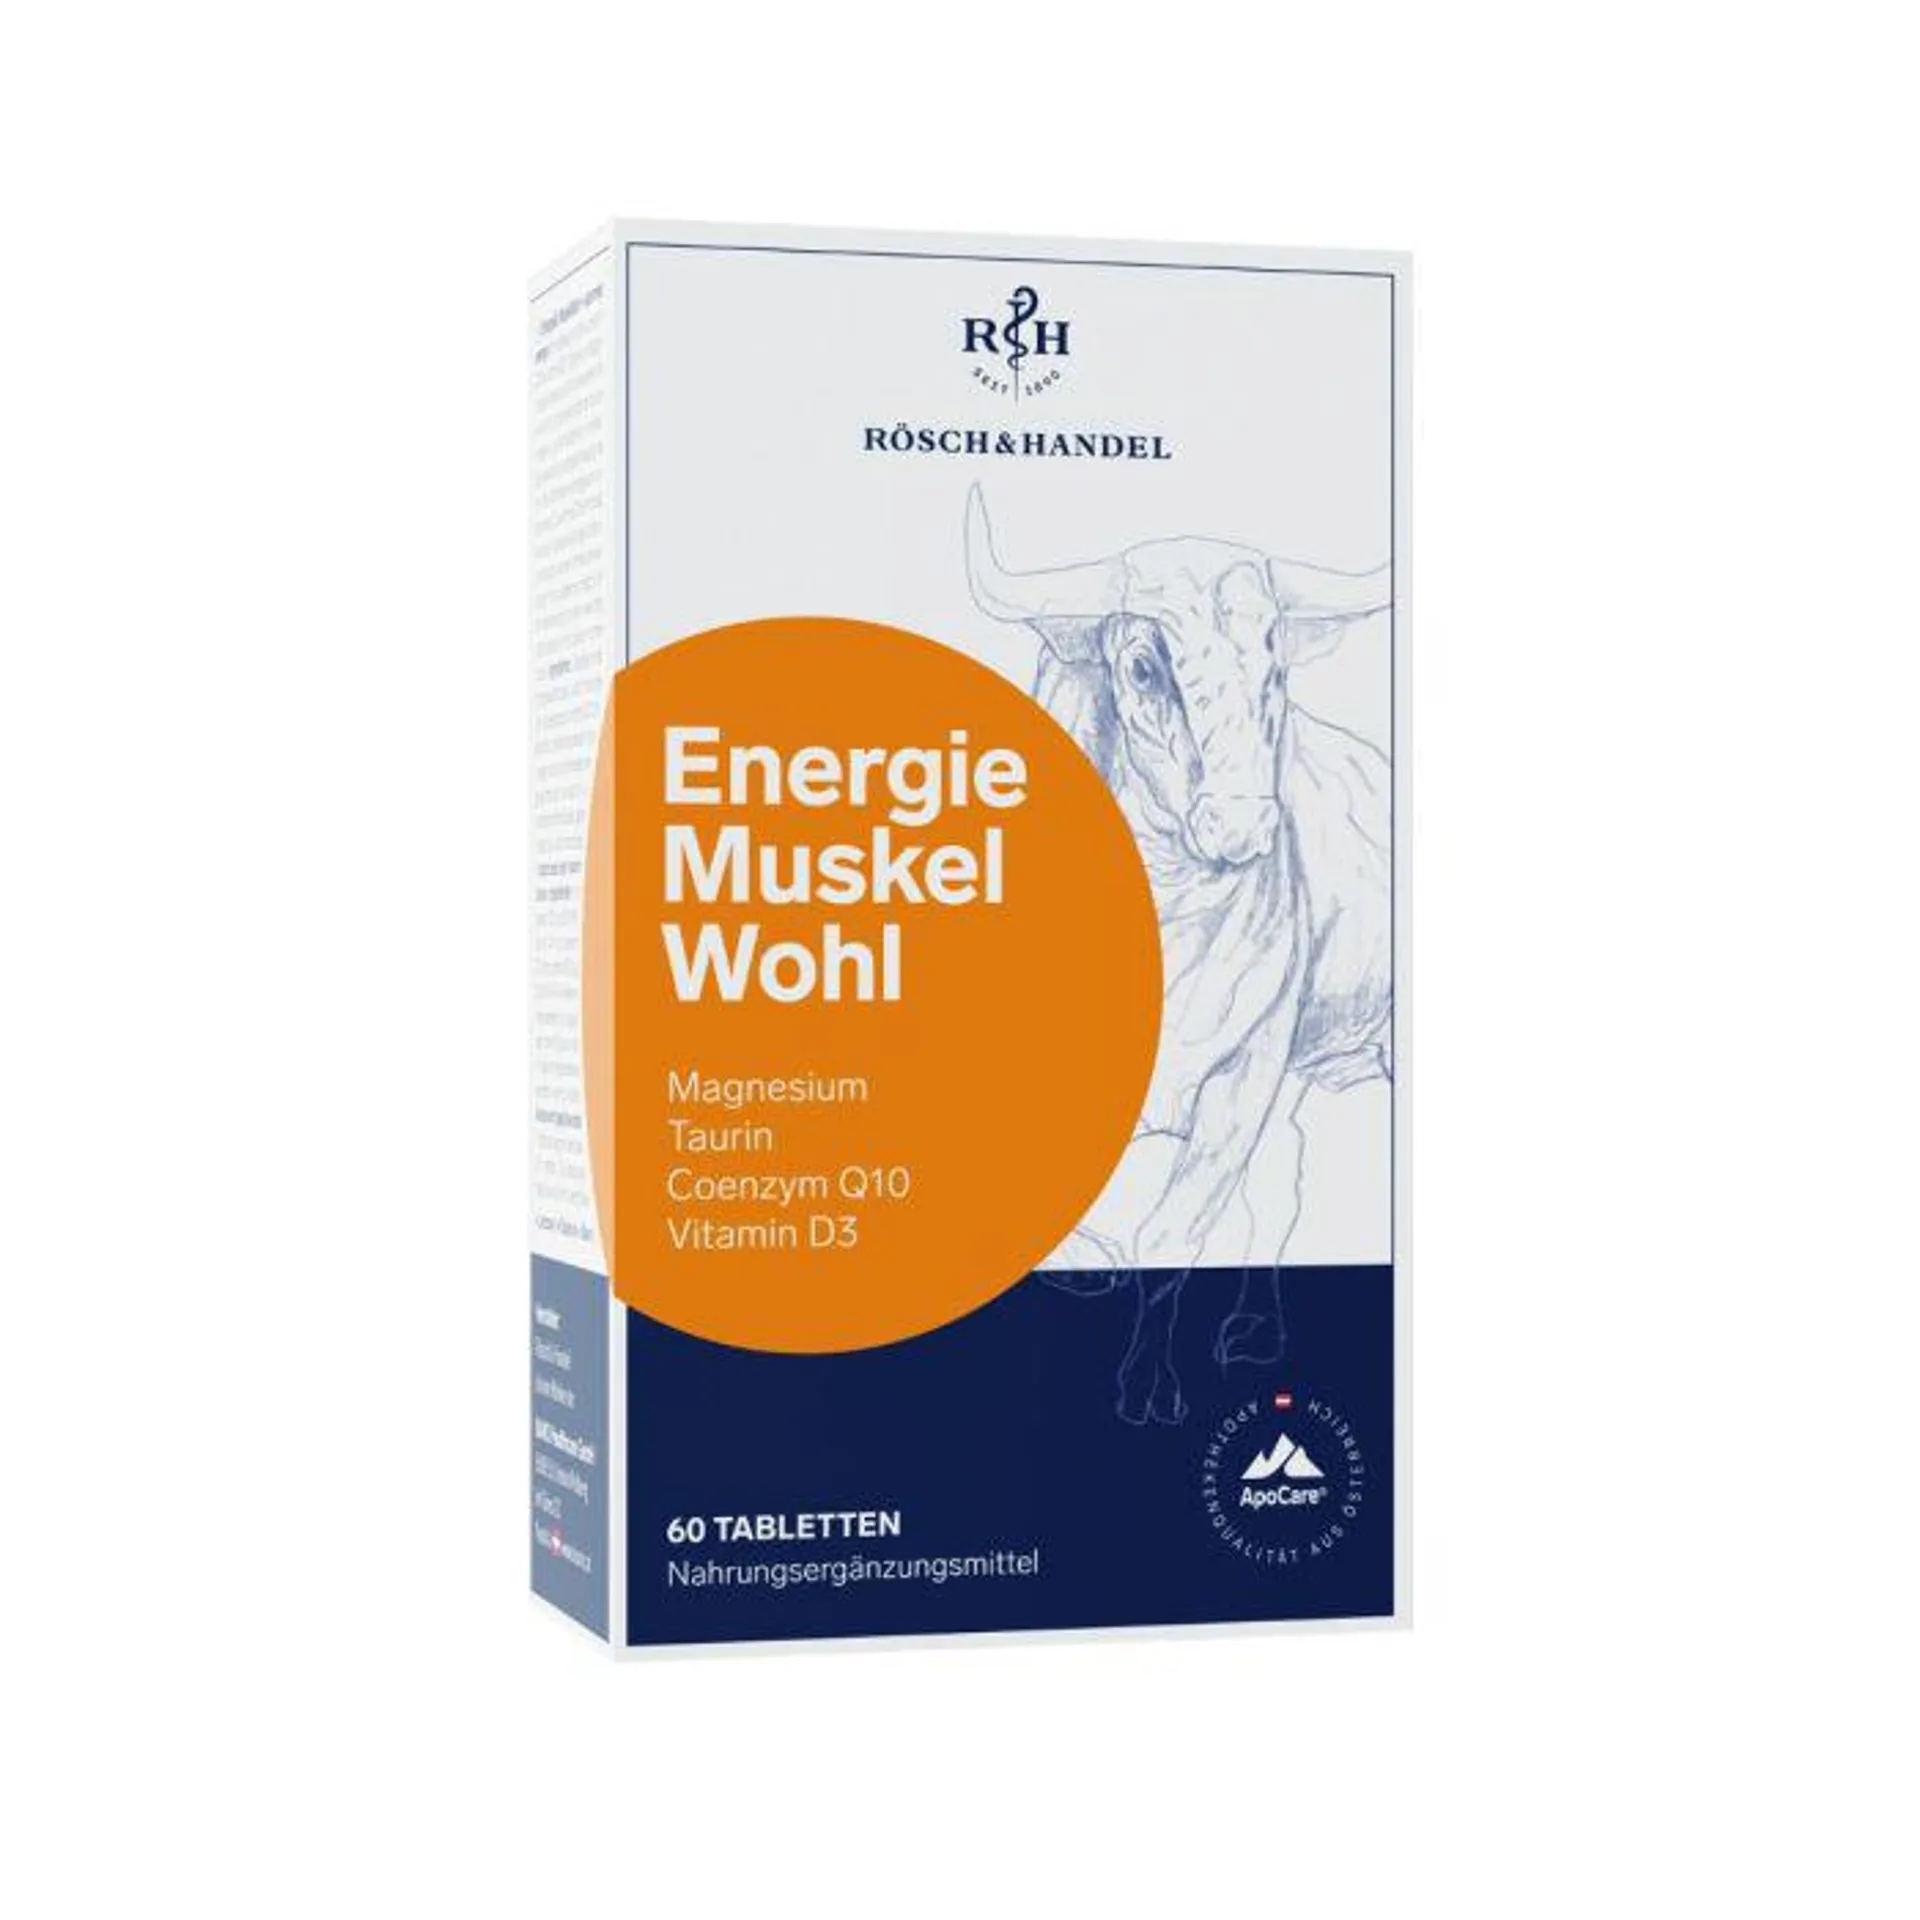 Bano ApoCare Energie & Muskelwohl 60 Tabletten